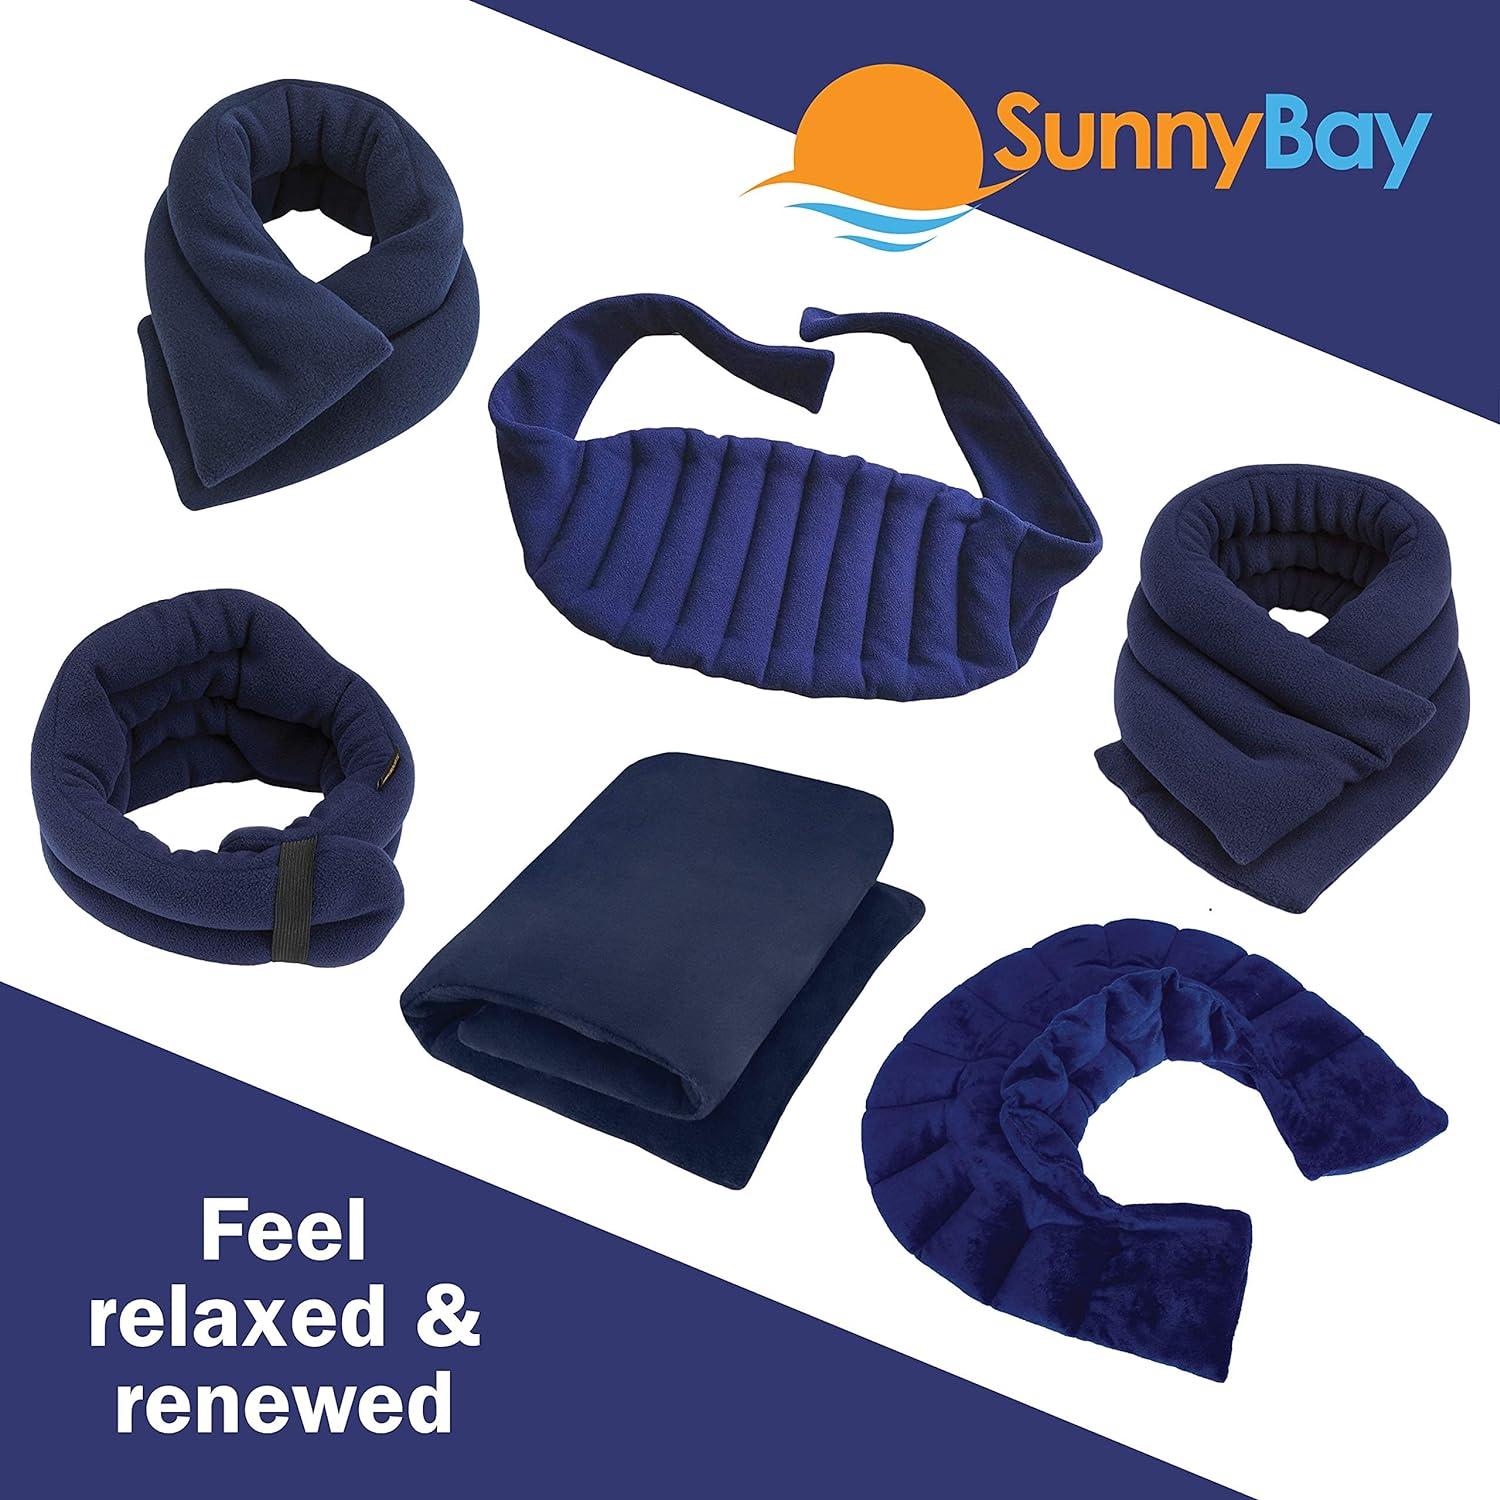 Sunny Bay Microwavable Neck Heating Pad for Pain Relief, Washable Neck Wrap Blue, Size: Medium